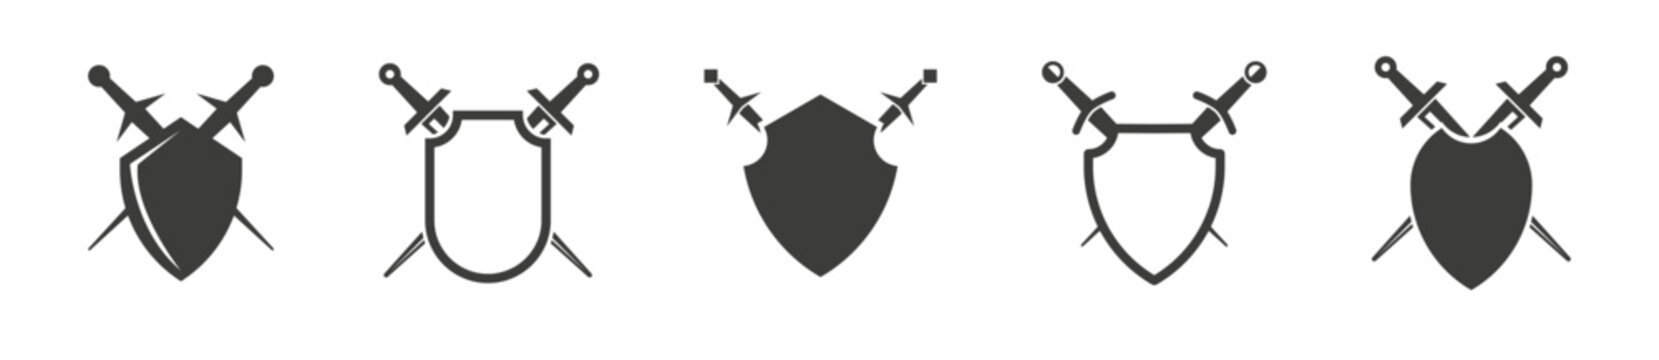 Sword With Shield Icon Set. Crossed Sword Collection. Vector Illustration. EPS 10.